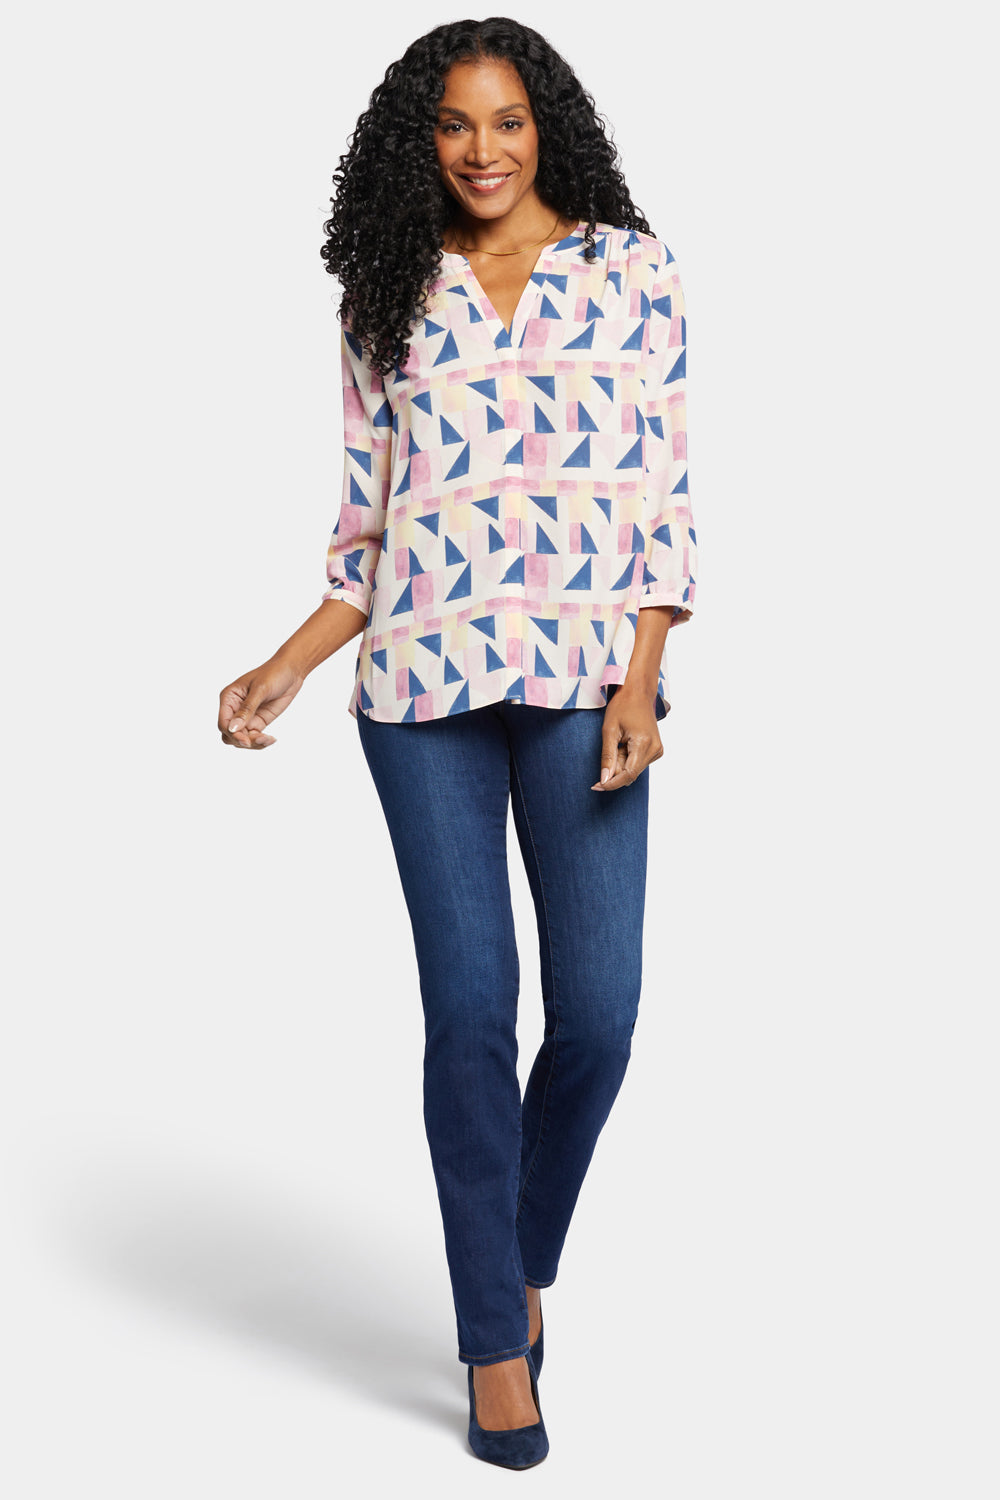 NYDJ Pintuck Blouse  - Marquette